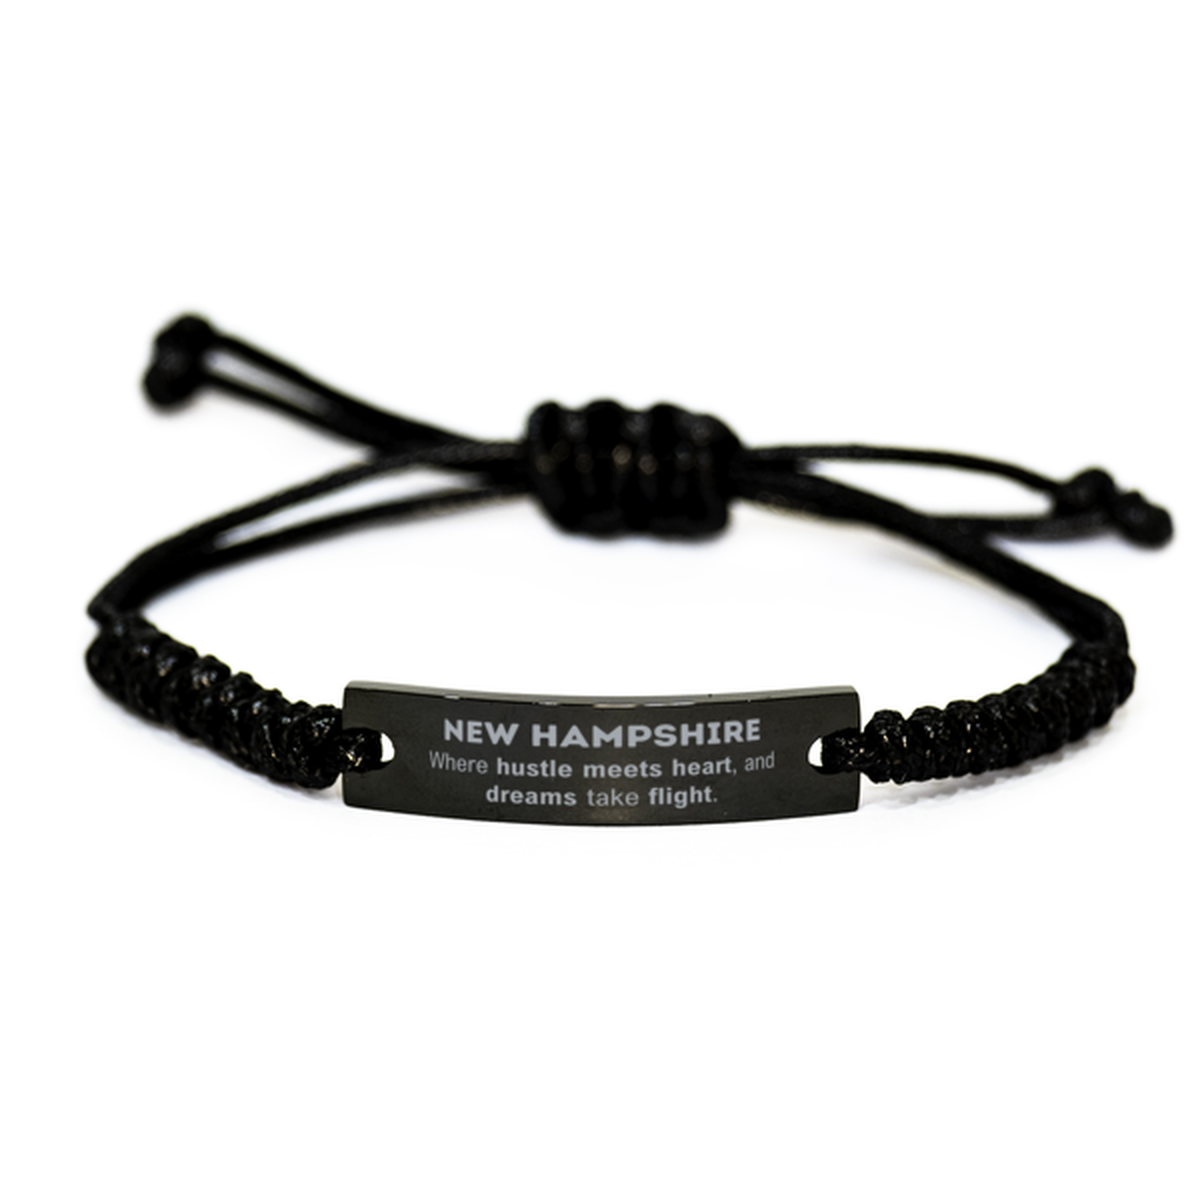 New Hampshire: Where hustle meets heart, and dreams take flight, New Hampshire Gifts, Proud New Hampshire Christmas Birthday New Hampshire Black Rope Bracelet, New Hampshire State People, Men, Women, Friends